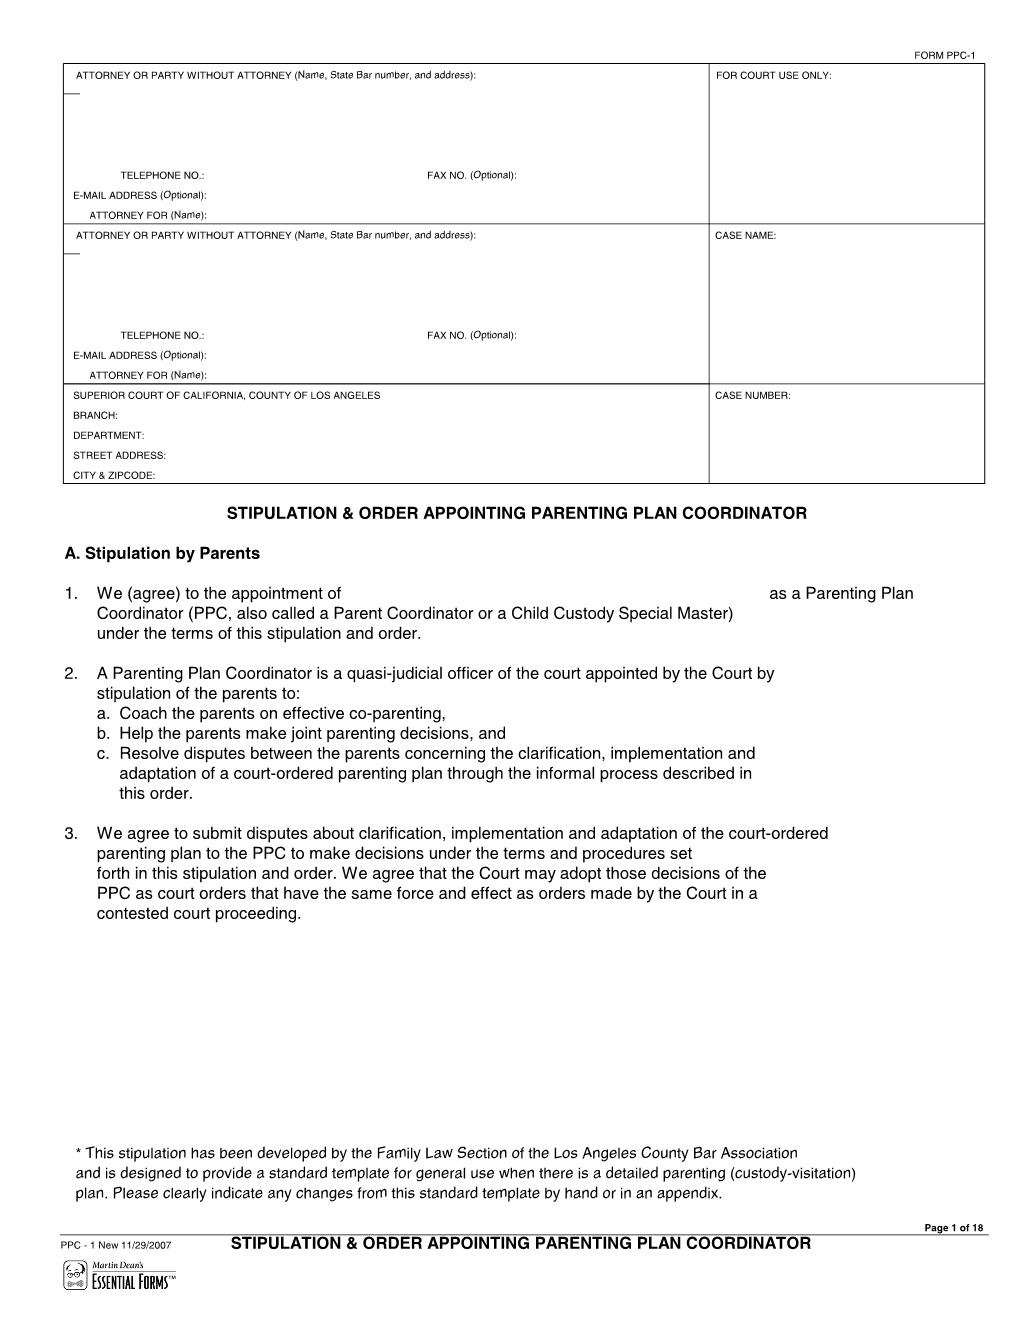 Stipulation and Order Appointing Parenting Plan Coordinator (Form PPC-1) P